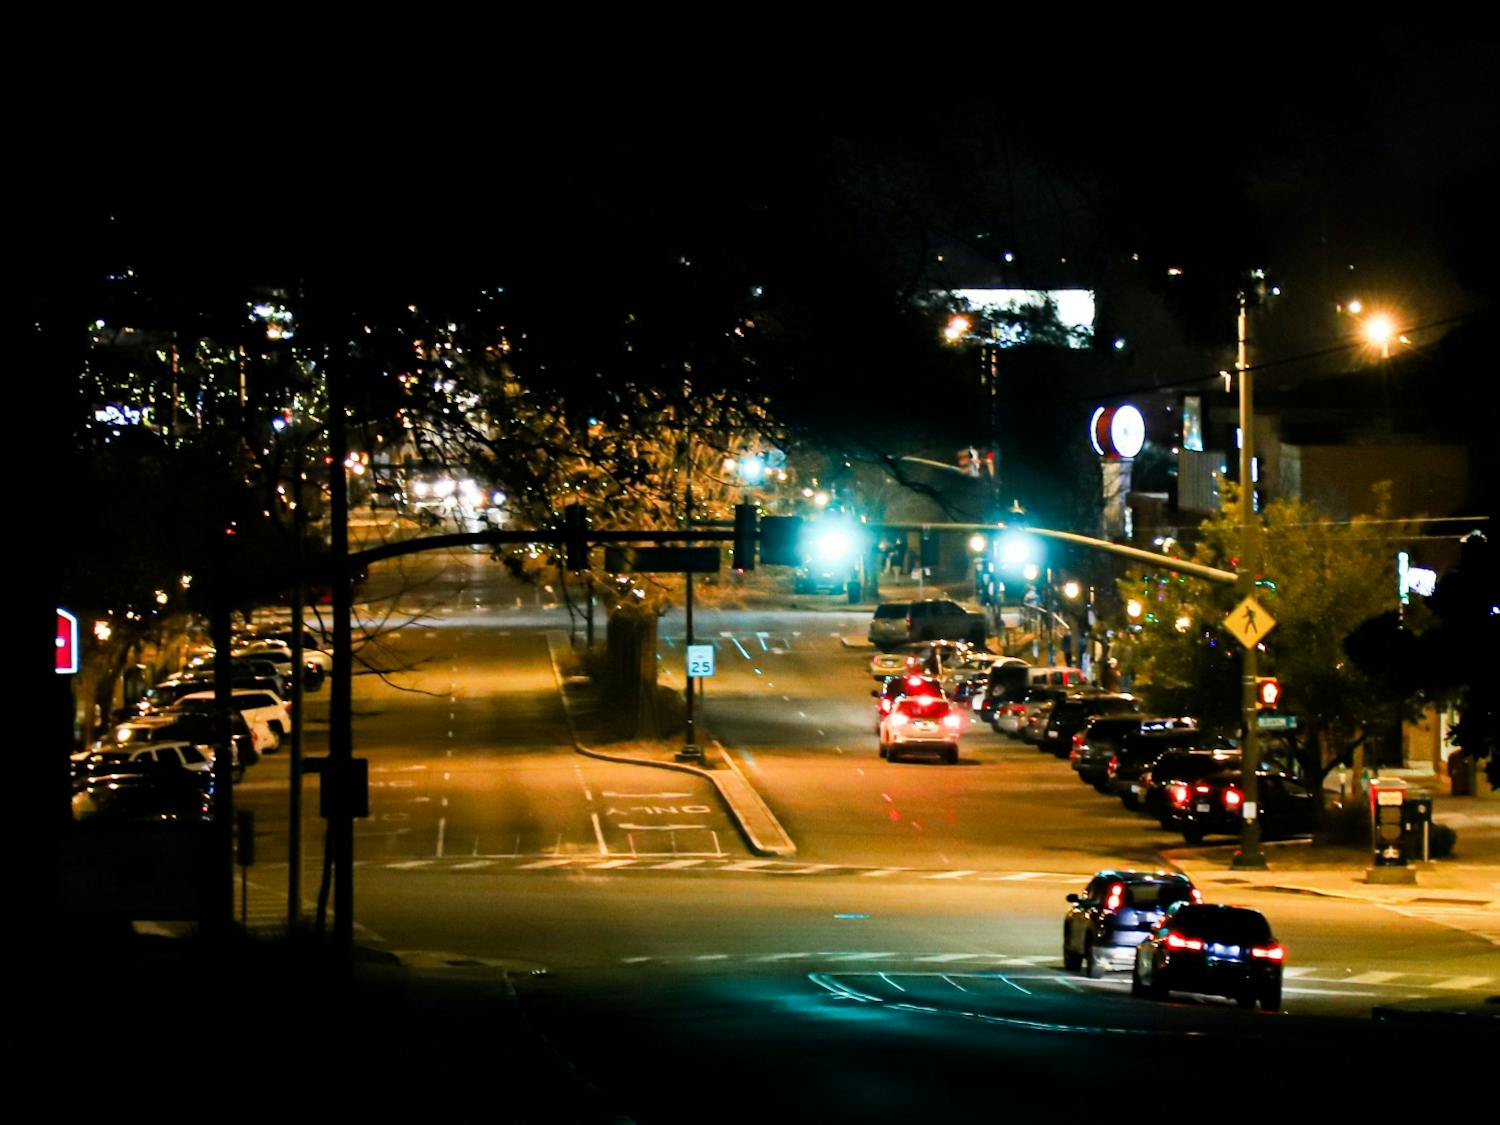 The intersection of Harden and Blossom Street at 10:07 p.m. on Jan. 29, 2021.&nbsp;